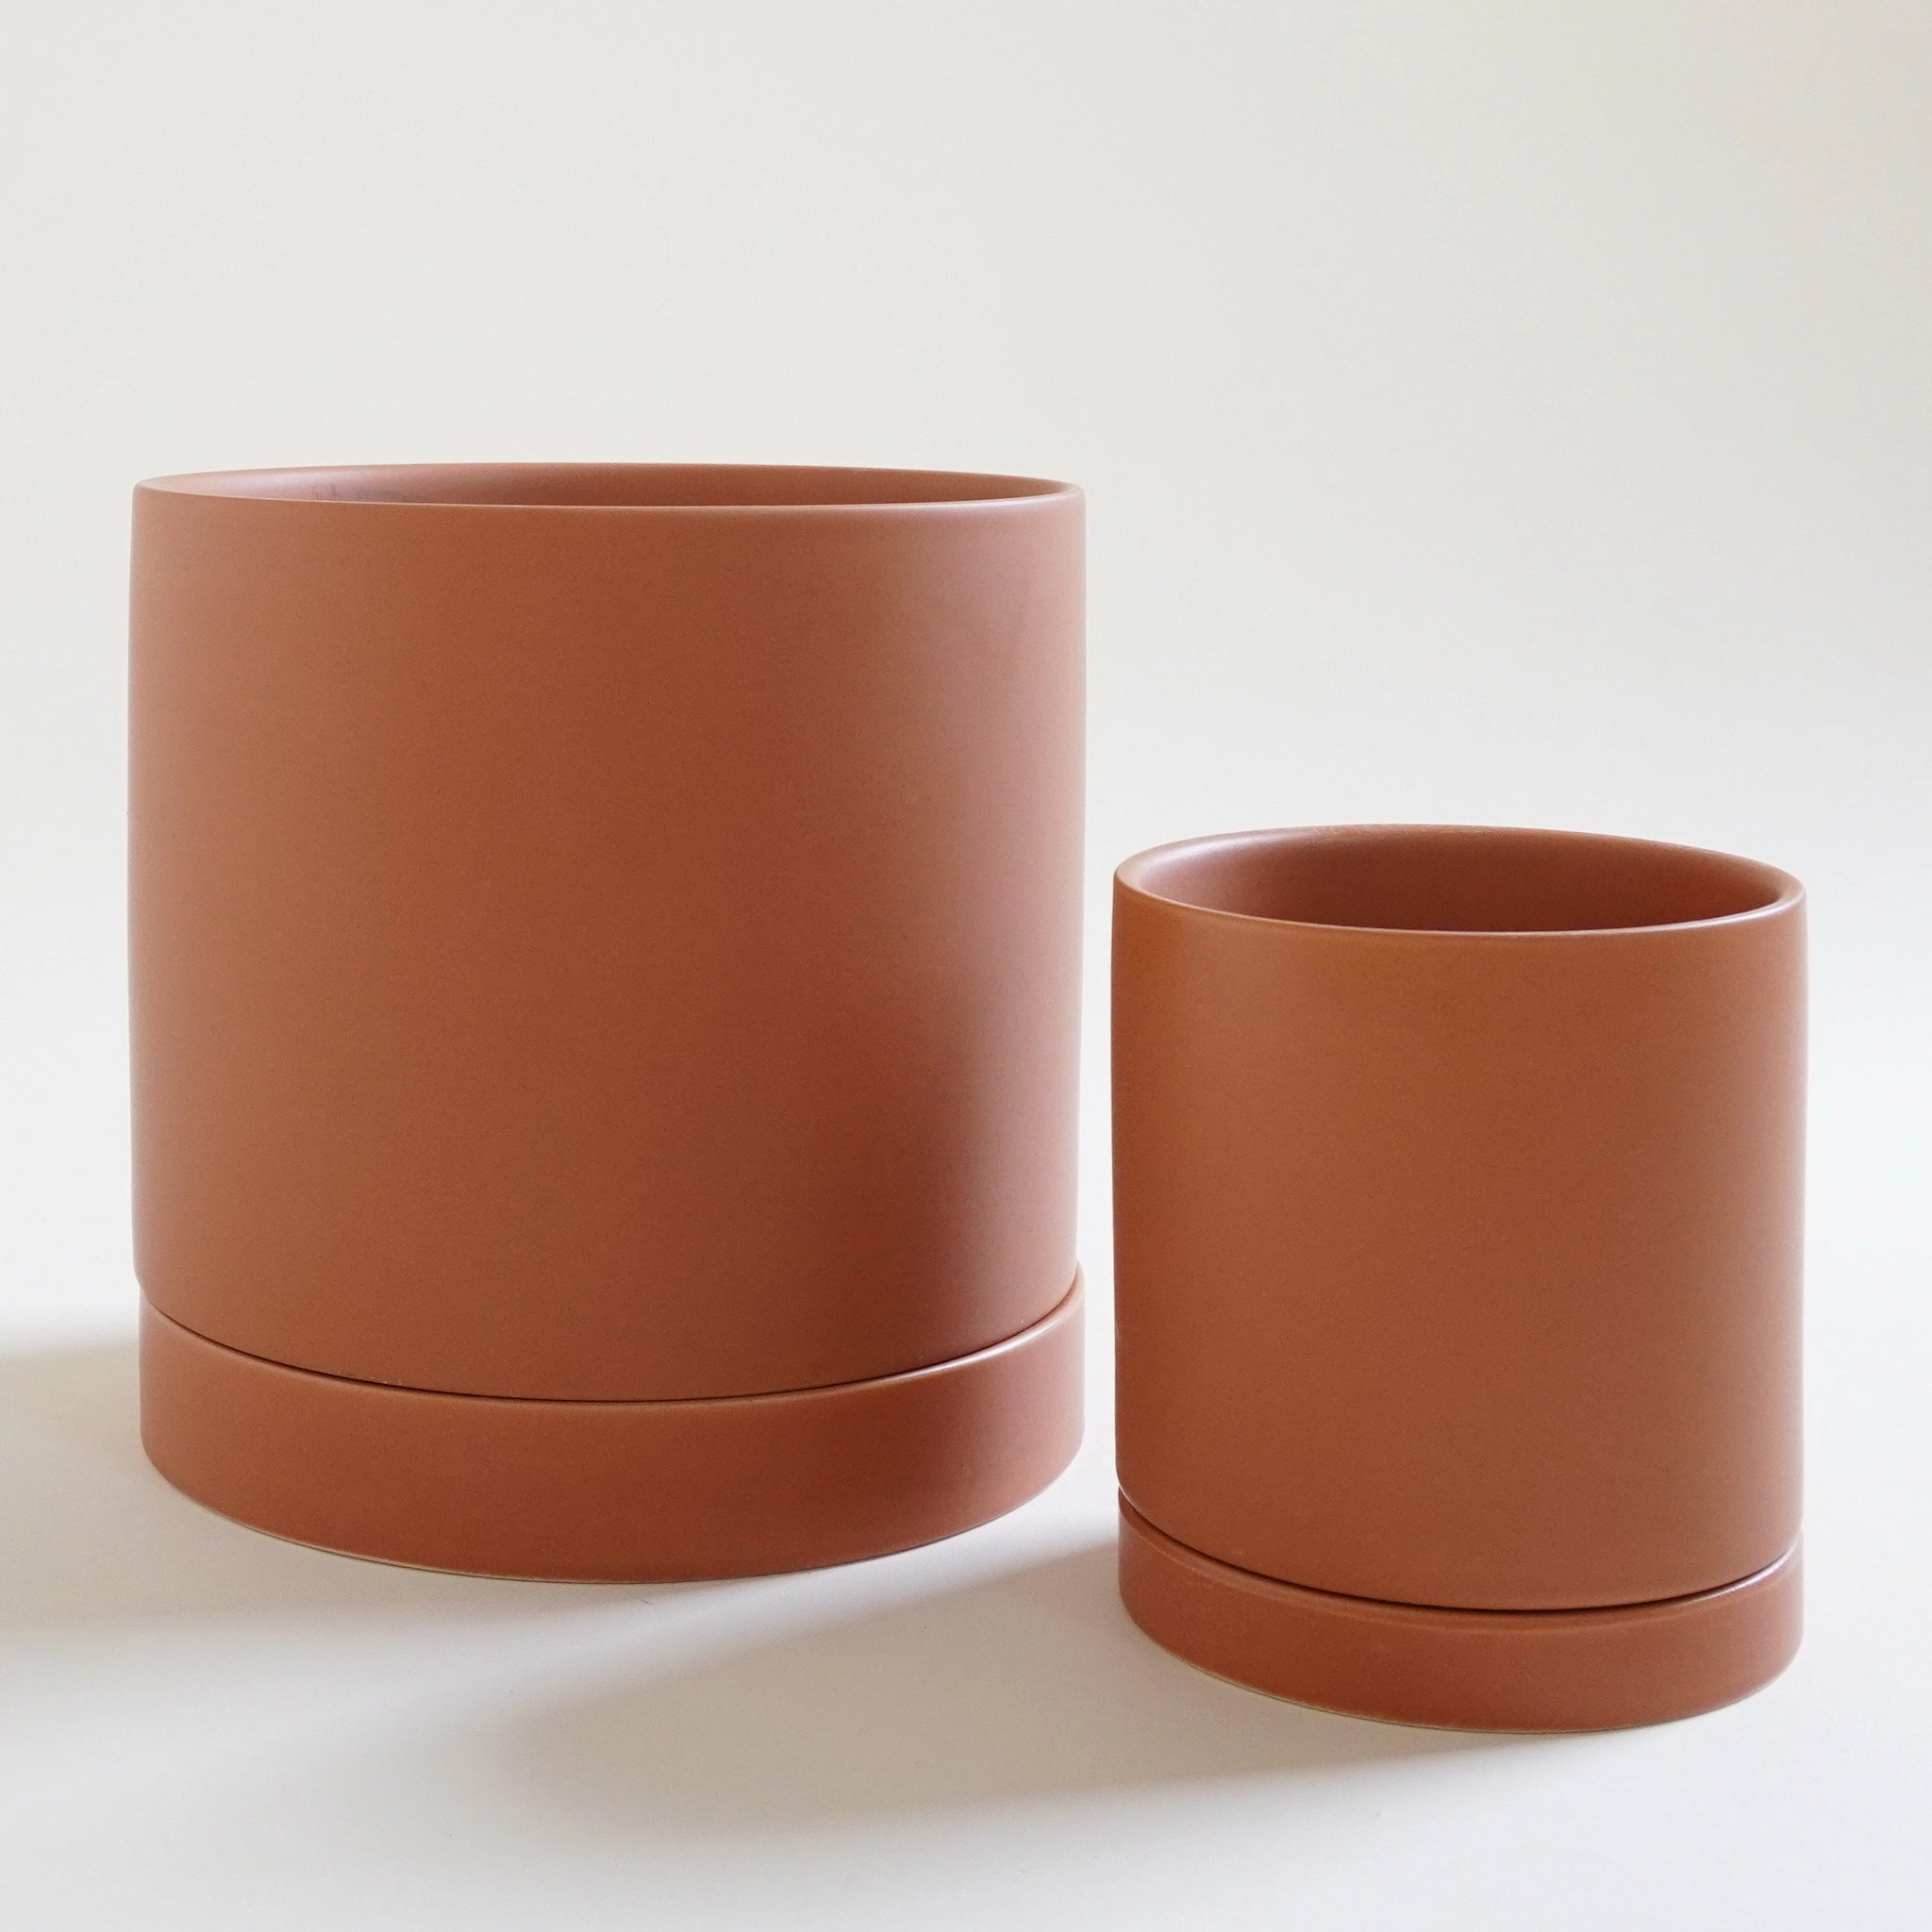 Two terracotta colored pots, one small and one large sit on a white ground